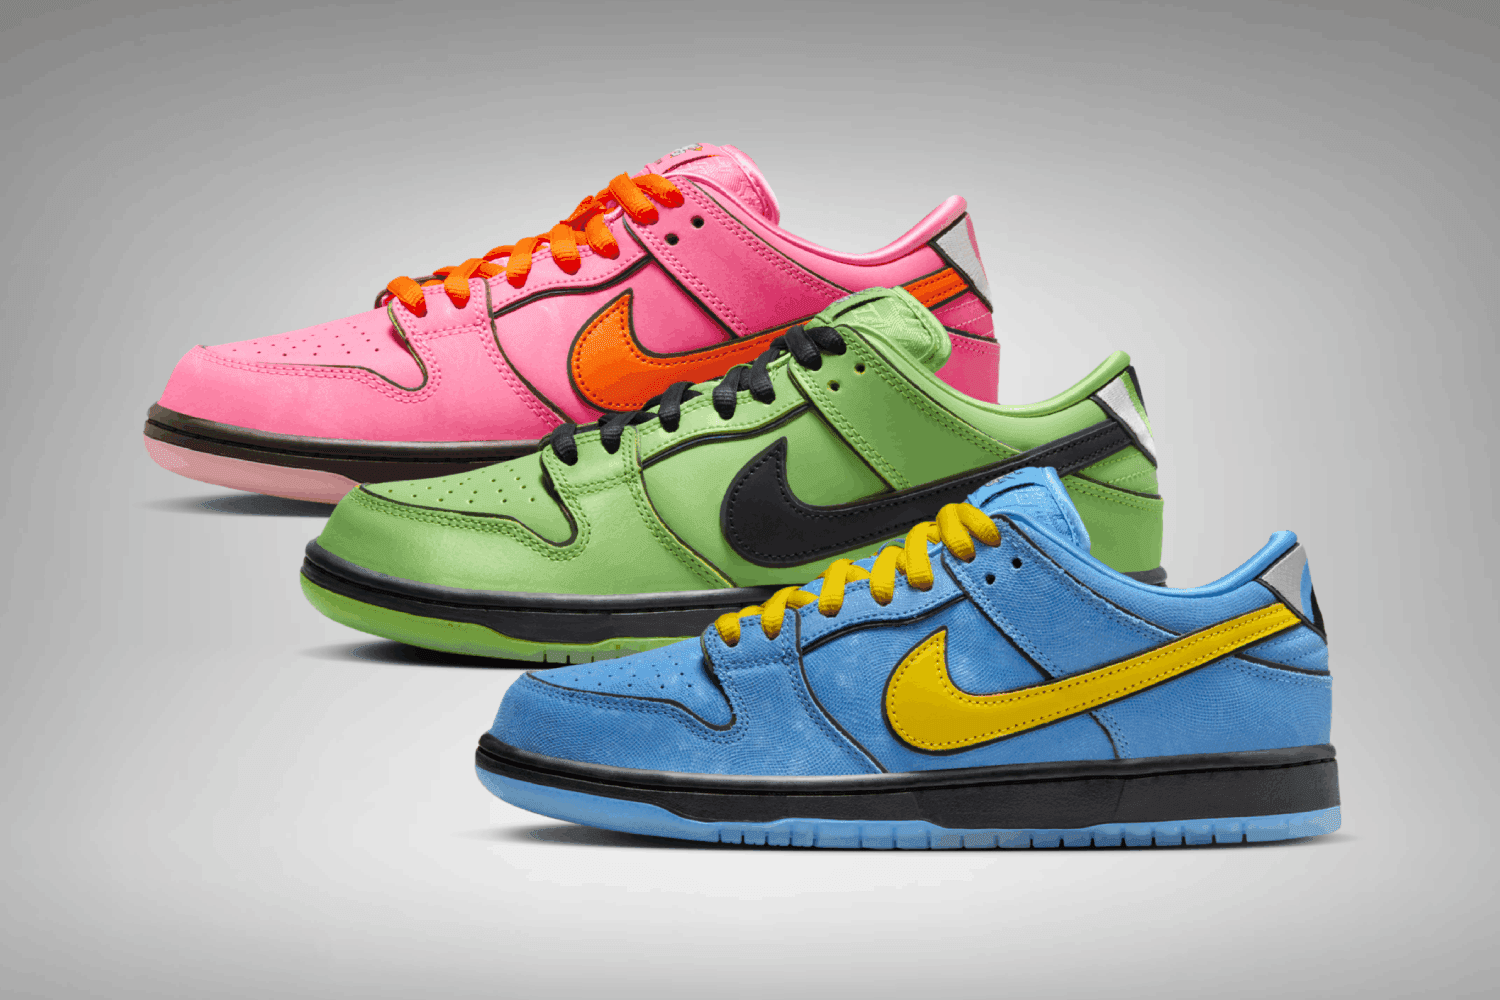 The The Powerpuff Girls x Nike SB Dunk Low pack has a release date